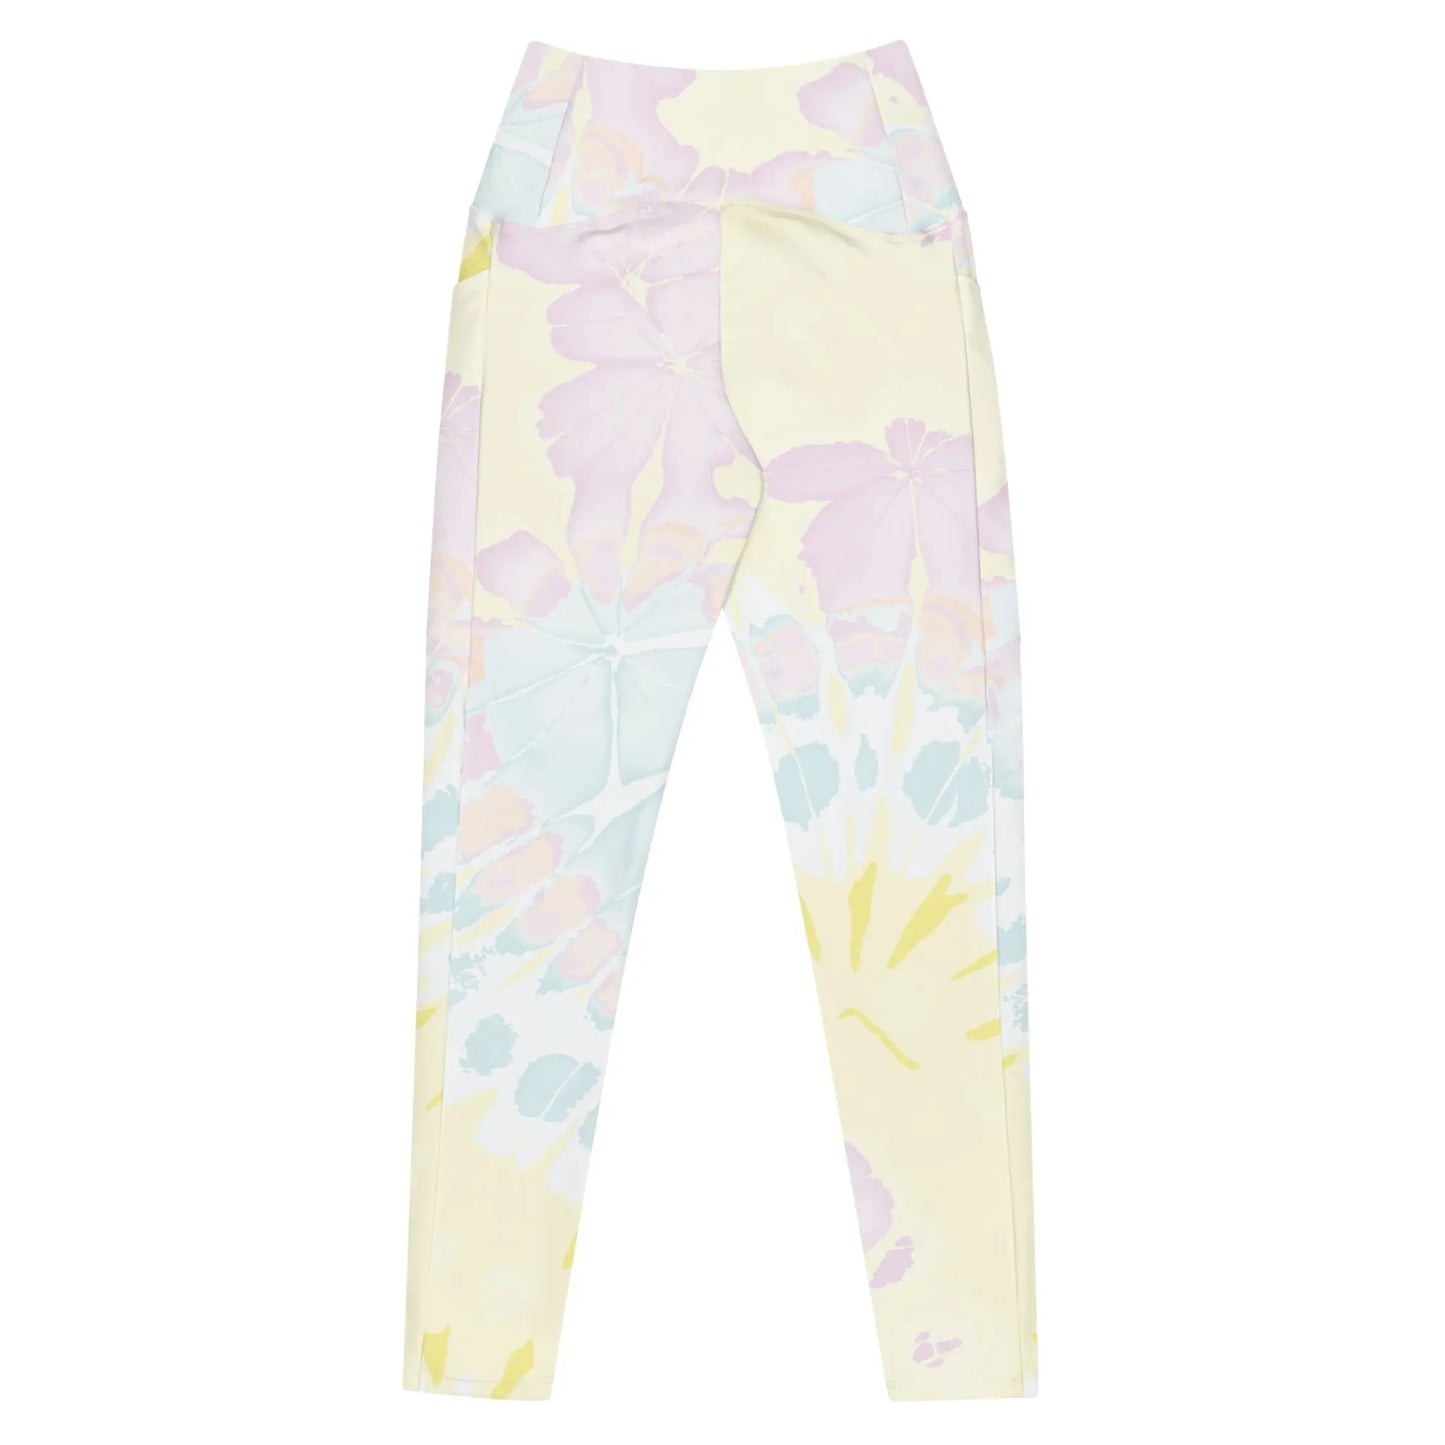 Sunny Recycled Leggings with Pockets Ellie Day Activewear